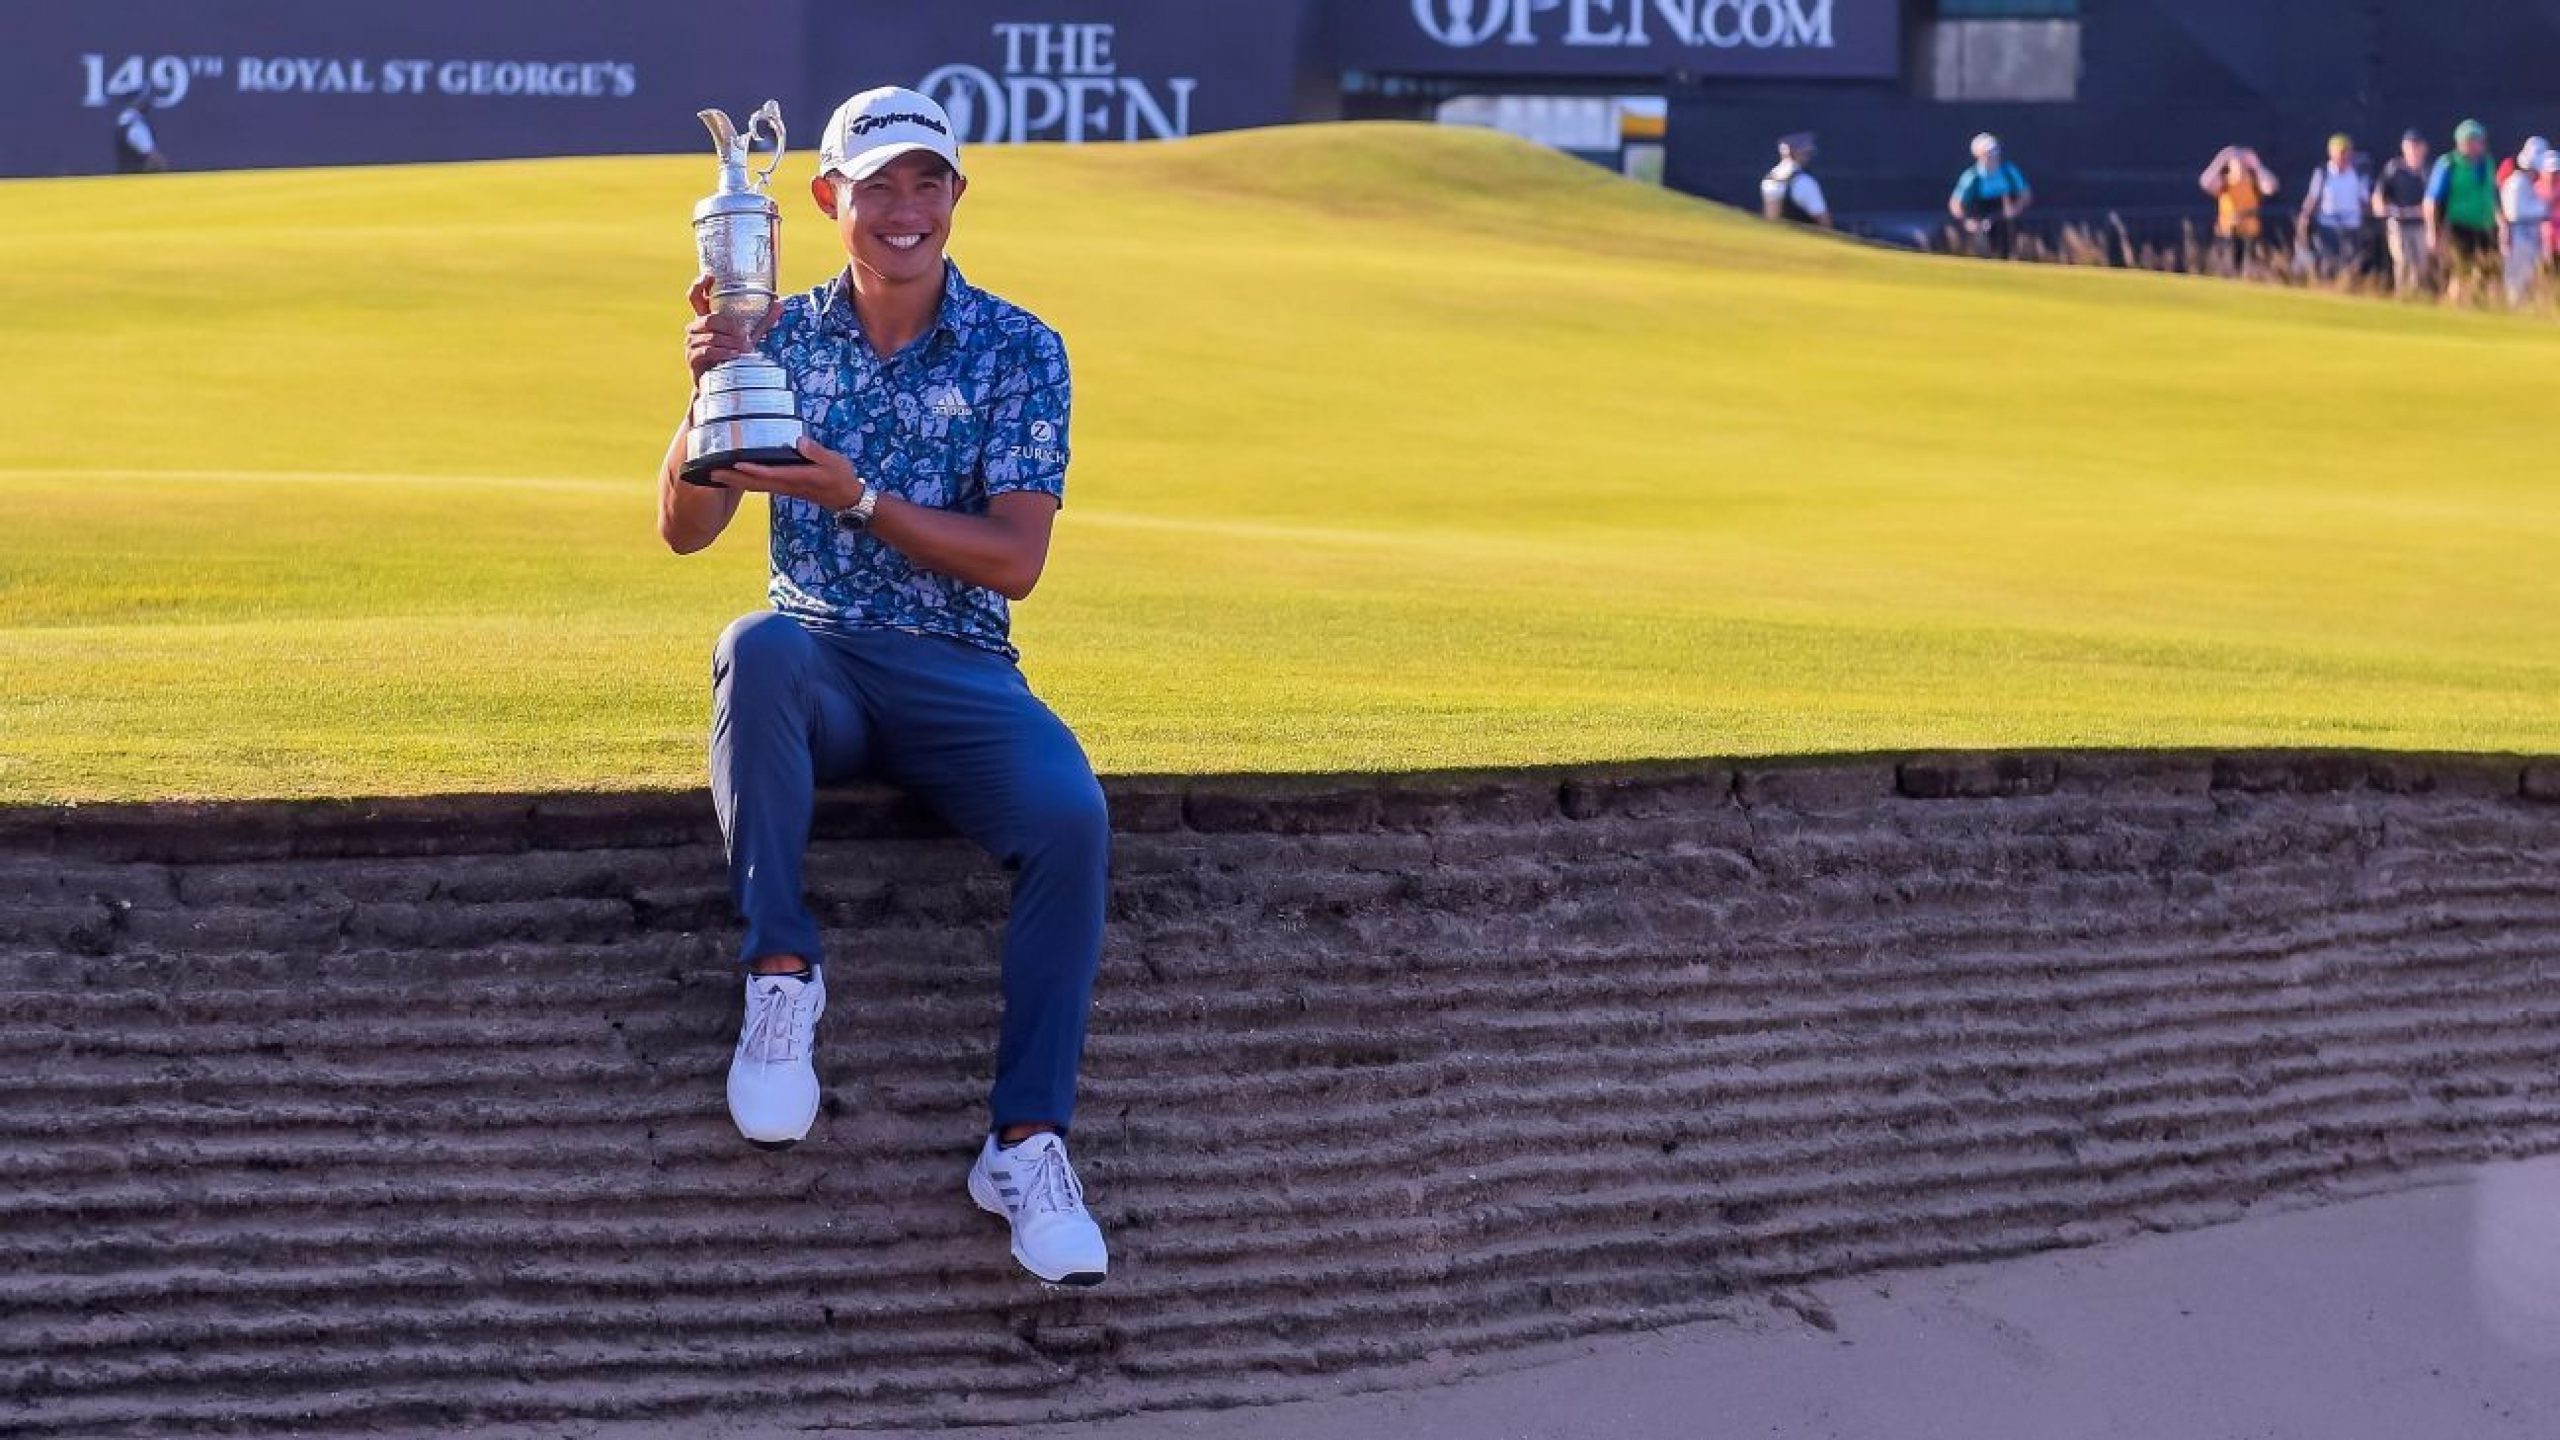 Collin Morikawa shows poise, with his game and his victory speech, in winning The Open